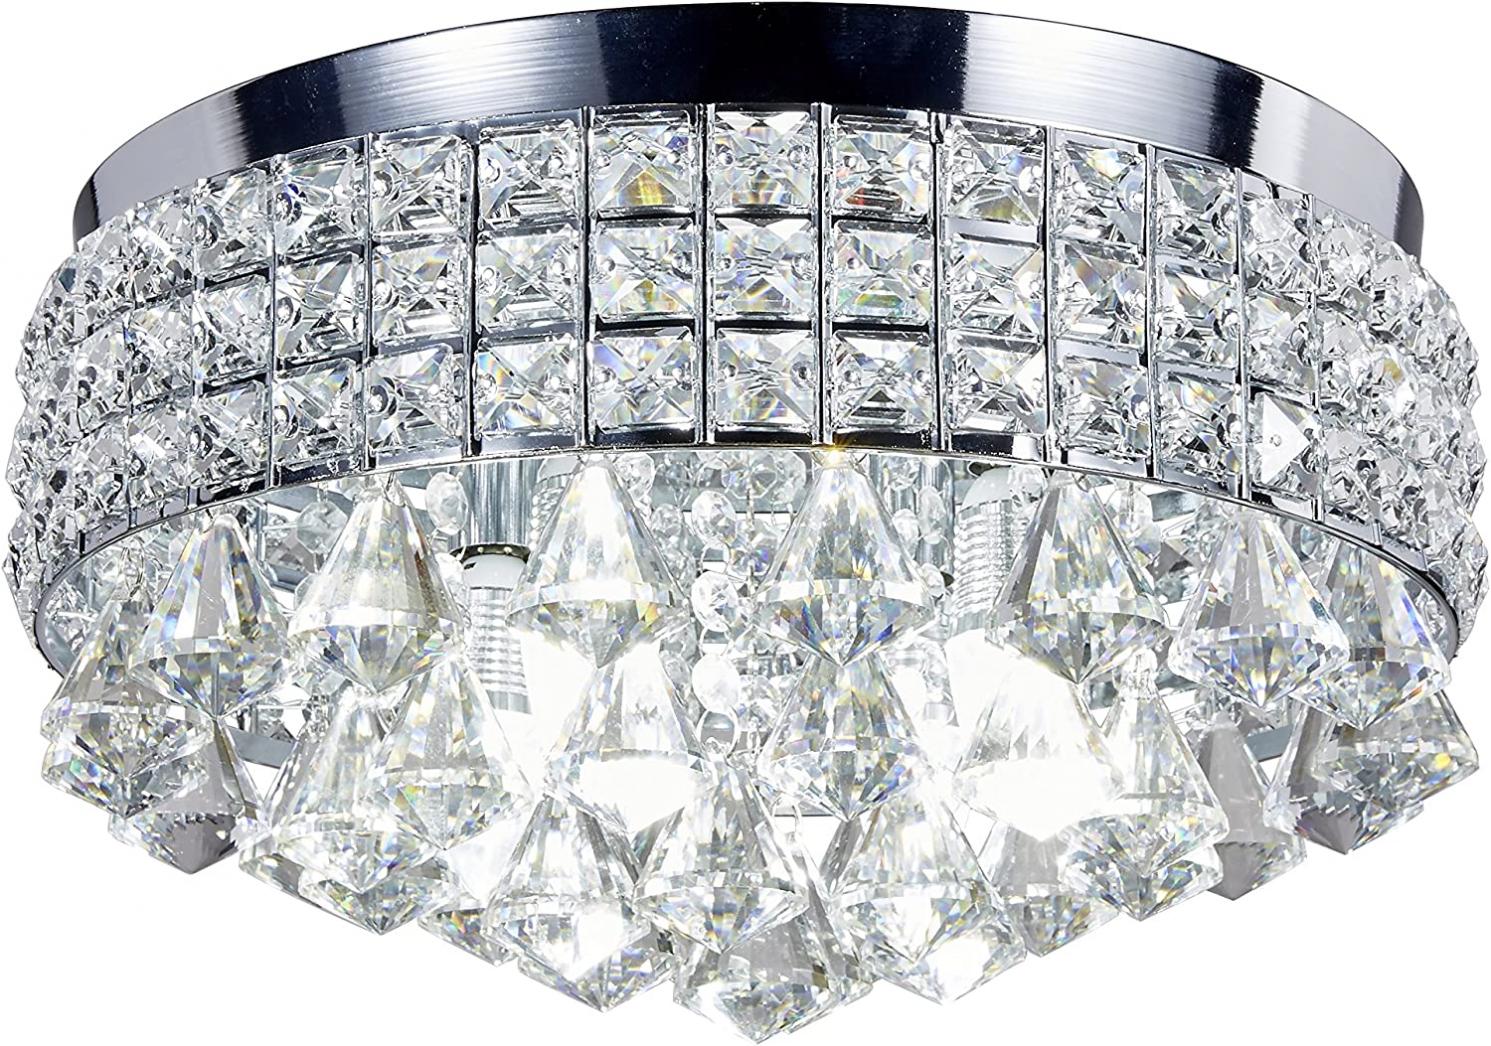 New Galaxy 4-Light Chrome Finish Metal Shade Flushmount Crystal Chandelier Ceiling Fixture